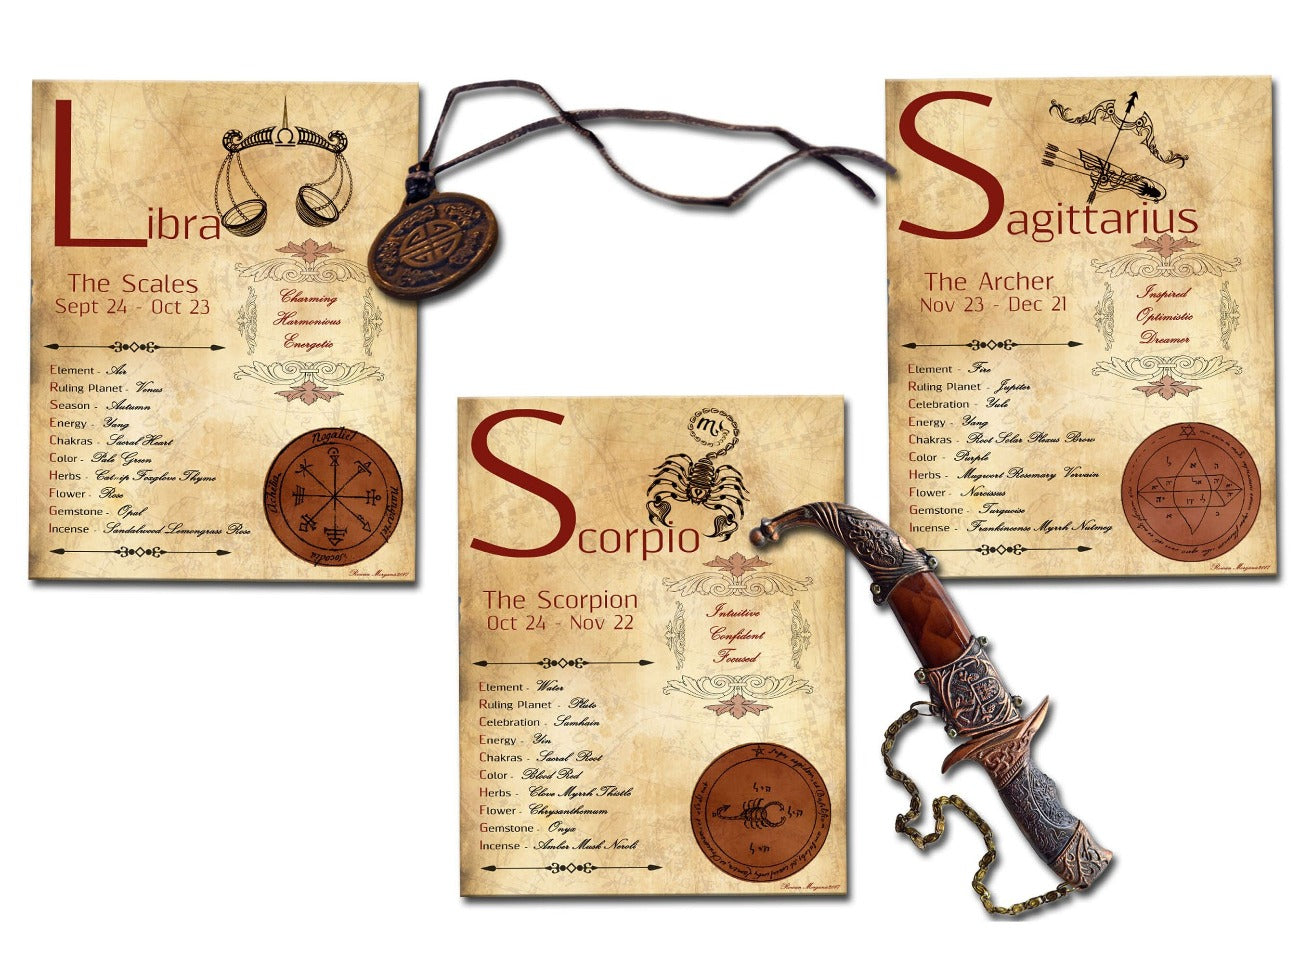 Libra, Sagittarius, and Scorpio pages show the Red Titles and zodiac imagery for each page.